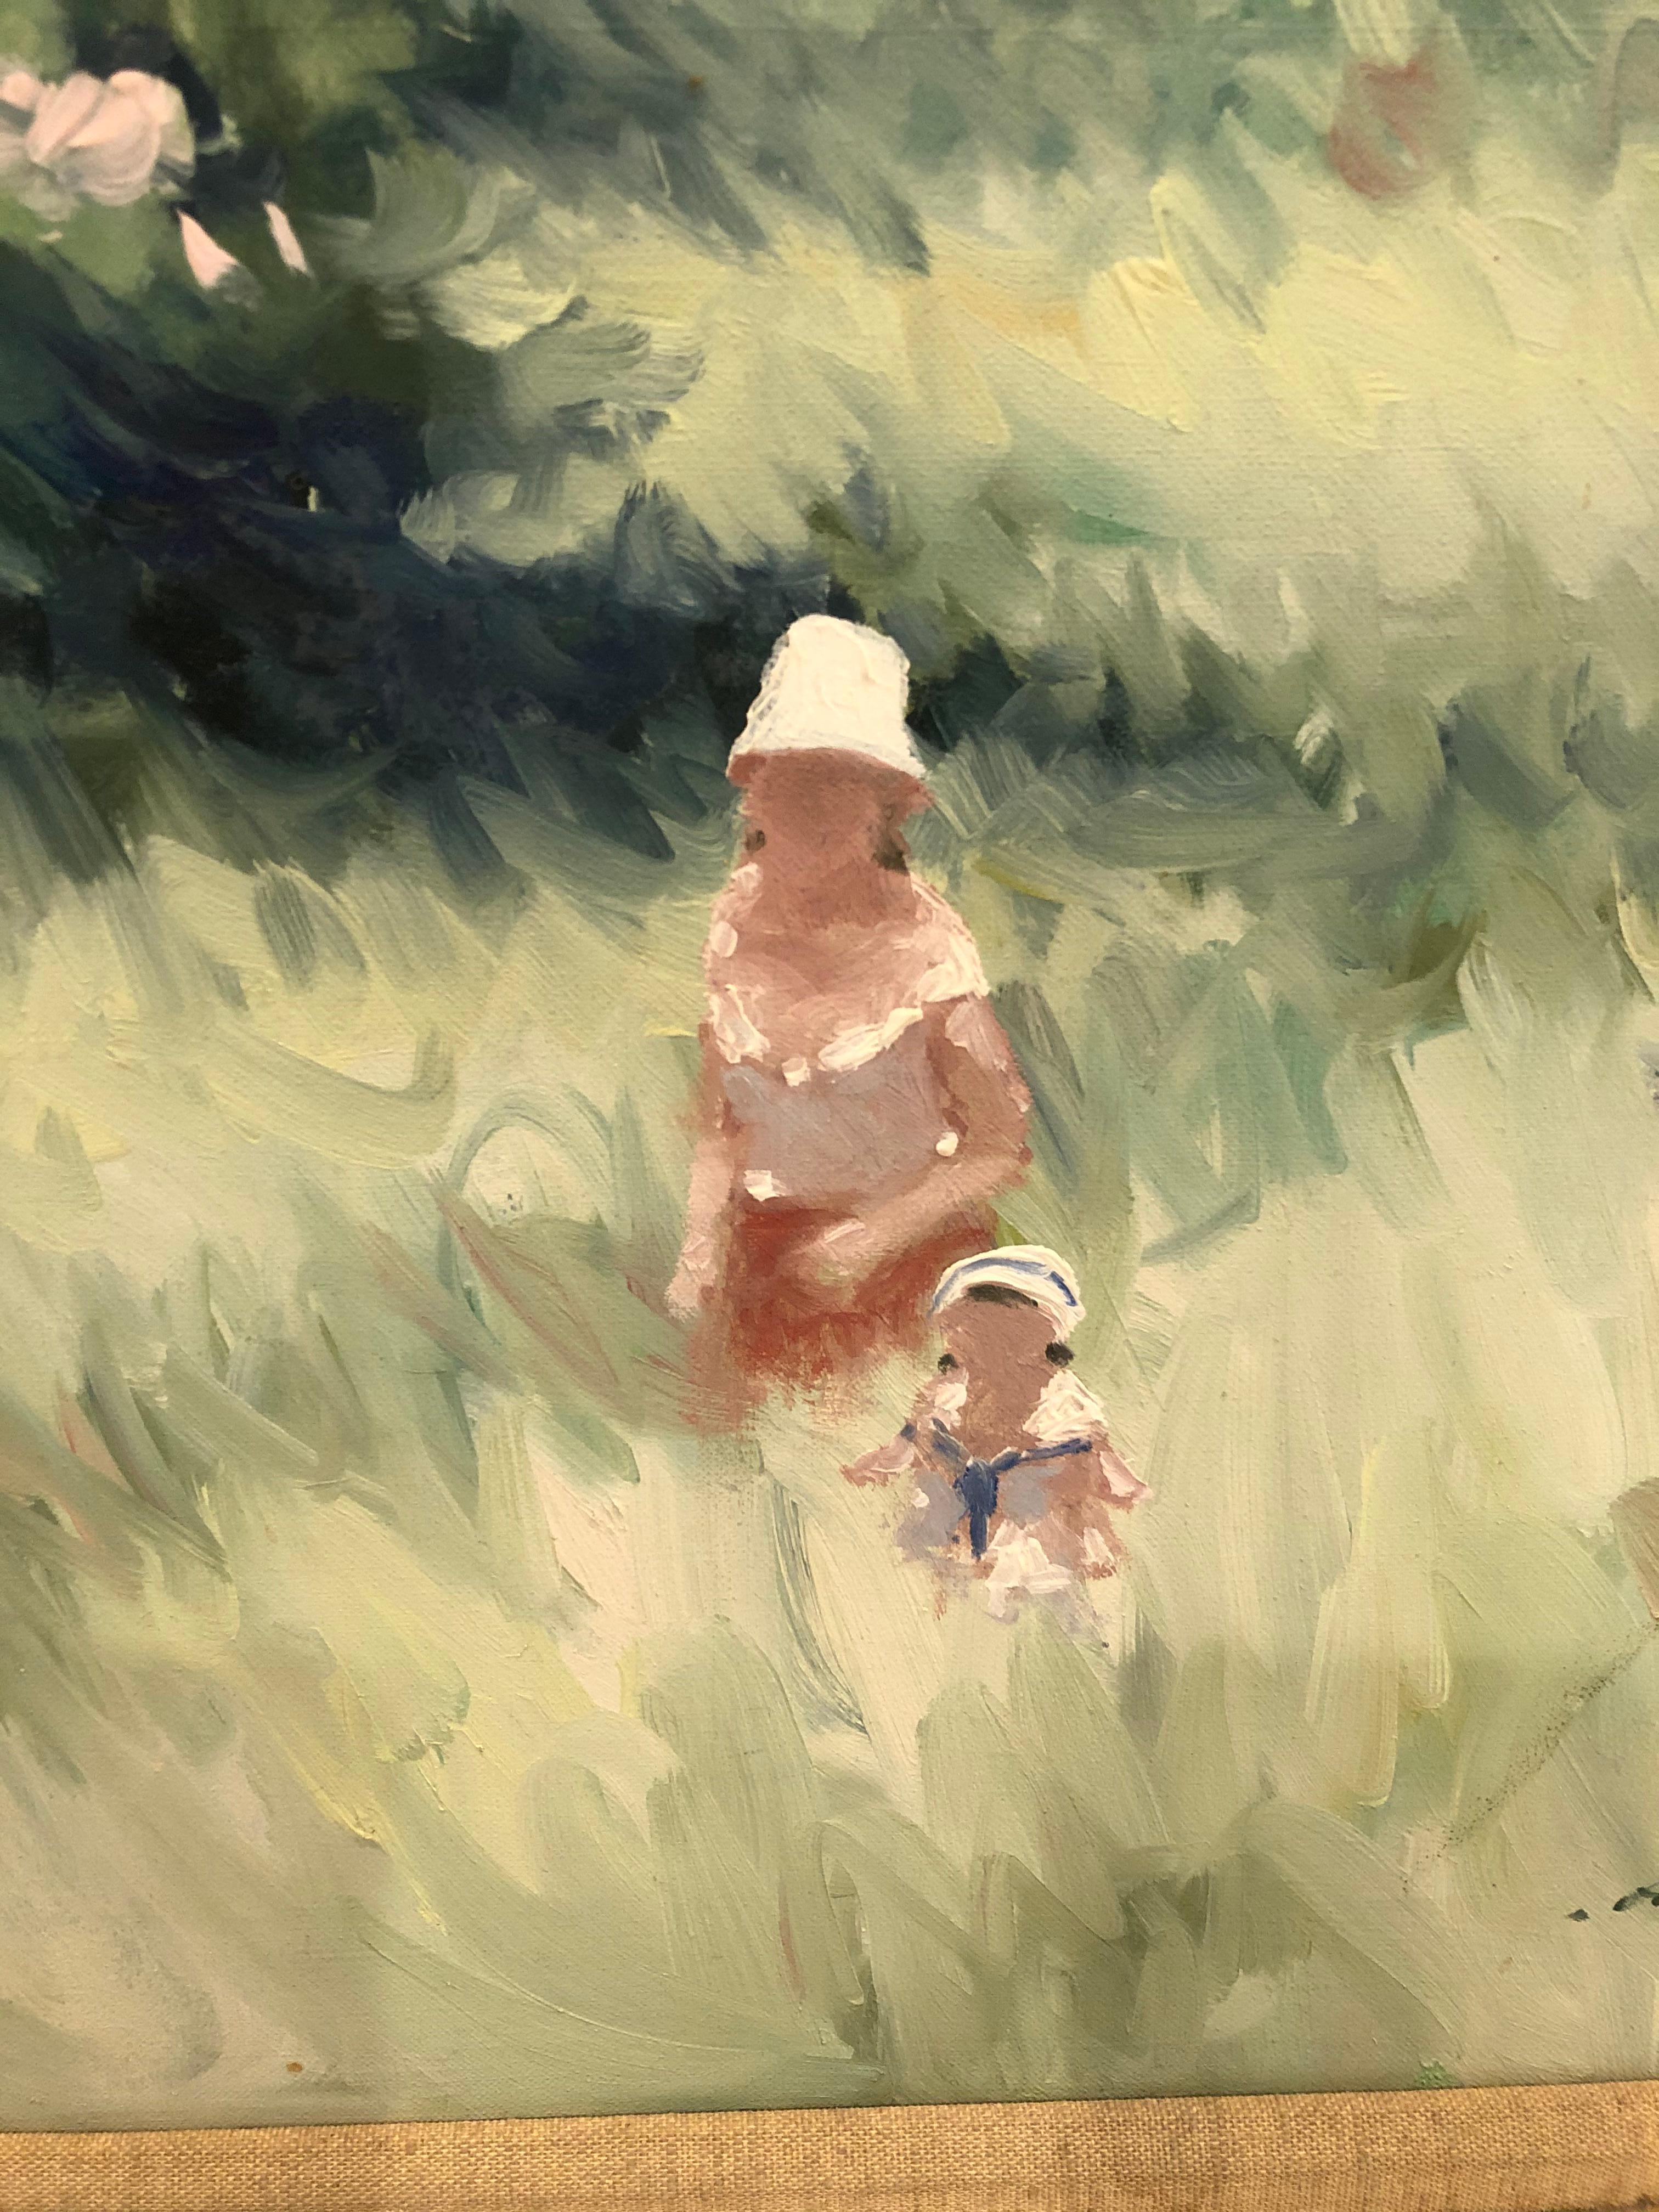 A gorgeous landscape with charming mother and daughter walking in the fields was painted by Andre Gisson, 1921-2003, famous for gorgeously rendered impressionist paintings. An American who graduated from the Pratt Institute, Gisson found difficulty